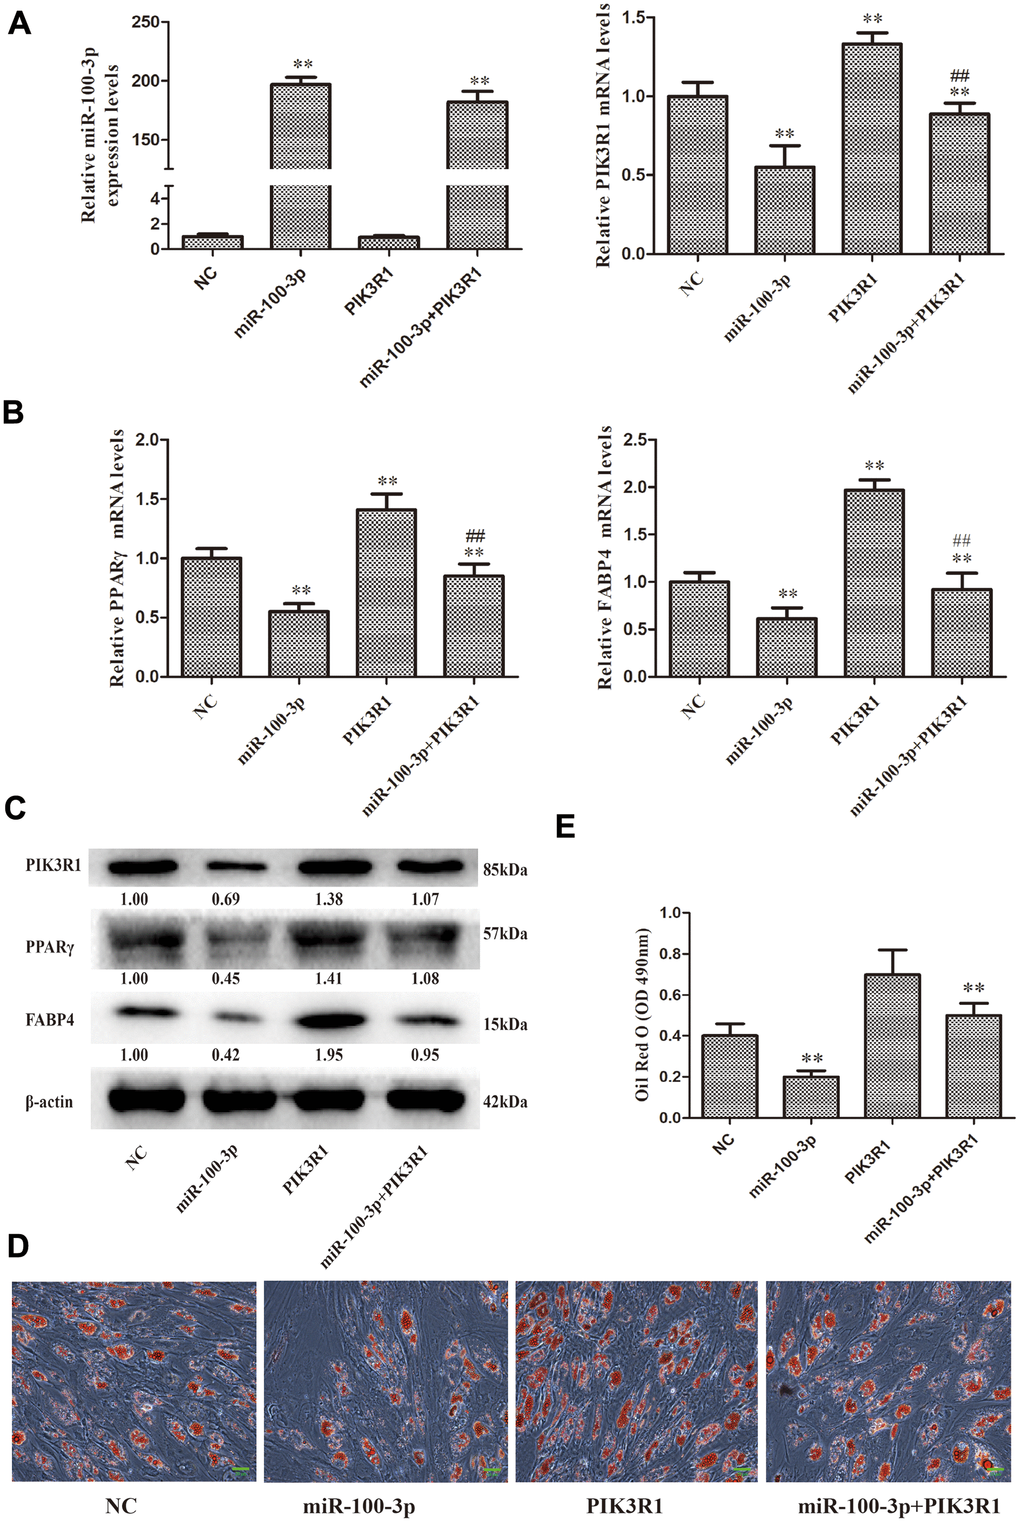 PIK3R1 overexpression was sufficient to reverse miR-100-3p-mediated suppression of hMSC adipogenesis. (A, B) miR-100-3p, PIK3R, PPARγ, and FABP4 mRNA levels in these cells were assessed. (C) Western blotting was used to assess PIK3R1, PPARγ, and FABP4 protein levels. (D) Lipid droplets were detected in these cells via Oil Red O staining; scale bar, 20 μm. (E) Oil Red O staining intensity differed significantly among study groups. Data were collected on day 7 post-adipogenic induction. Data are means ± SD (X ± SD, n=3). **P##P